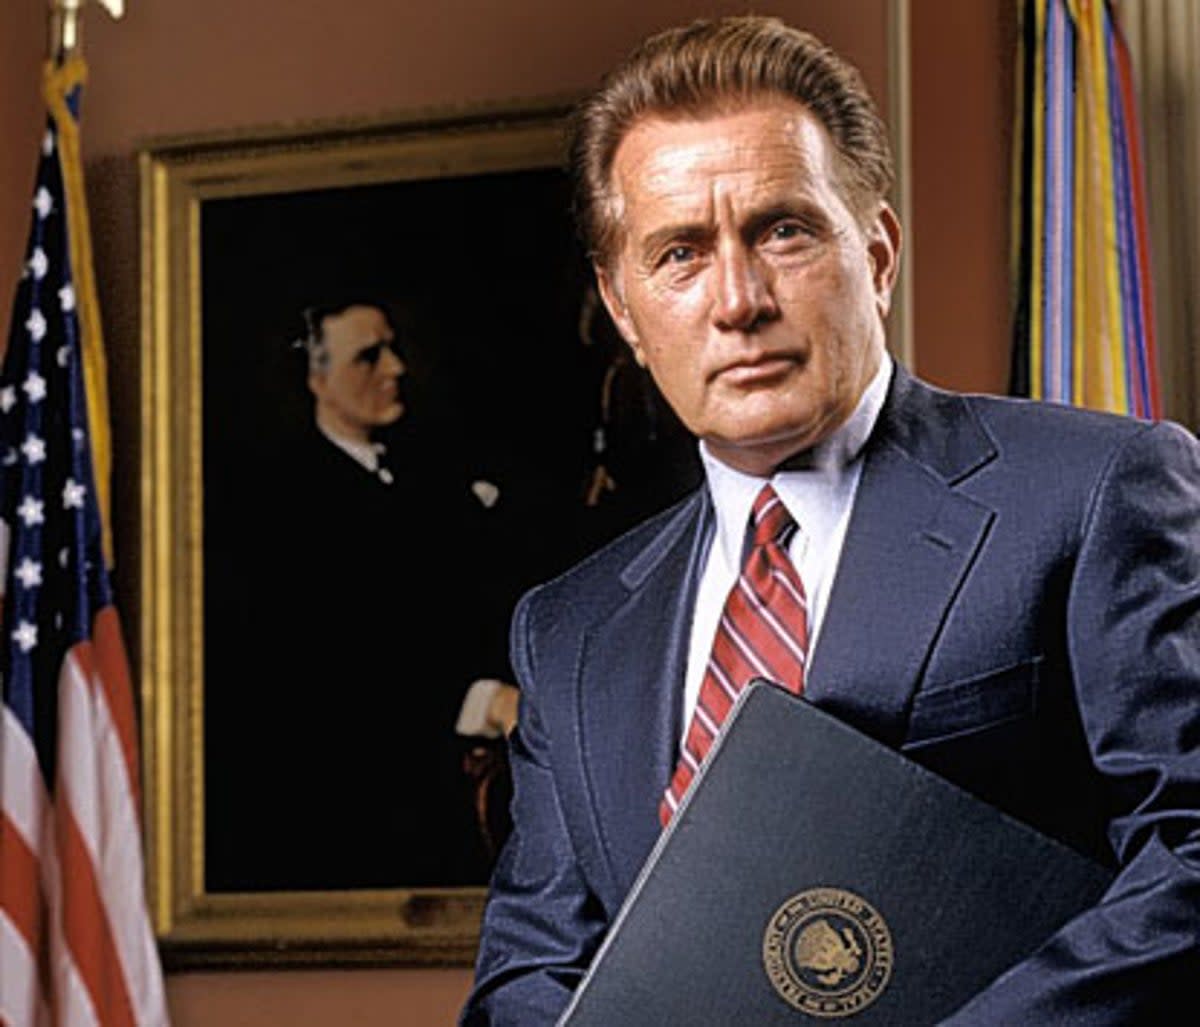 The West Wing's President Bartlet, played by Martin Sheen (BBC/Drama Republic/Sophie Muteve)